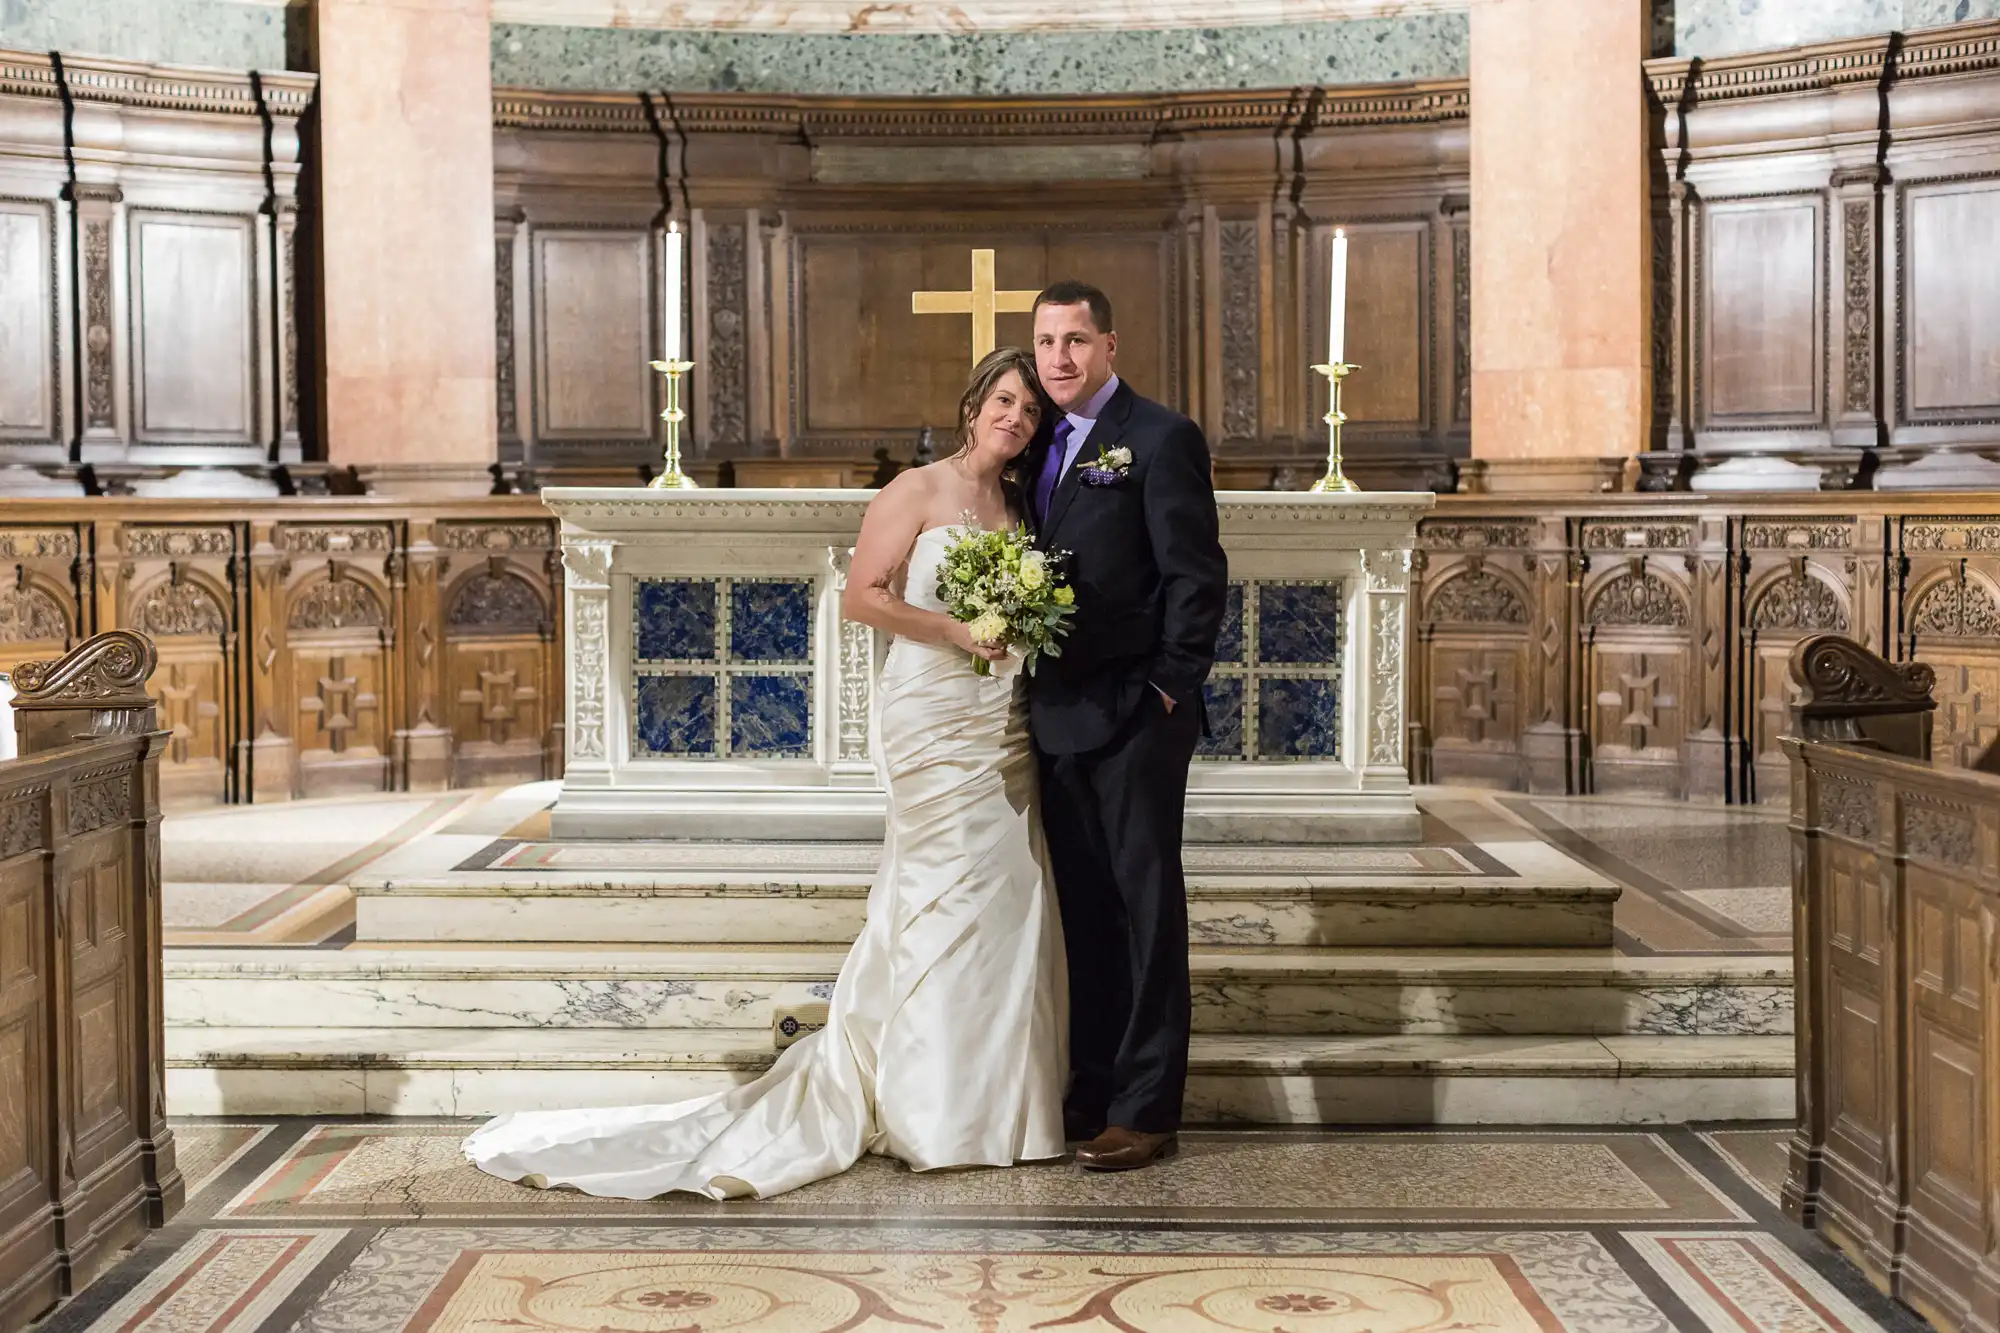 A bride and groom stand together in a grand church, smiling, with the groom embracing the bride from behind.